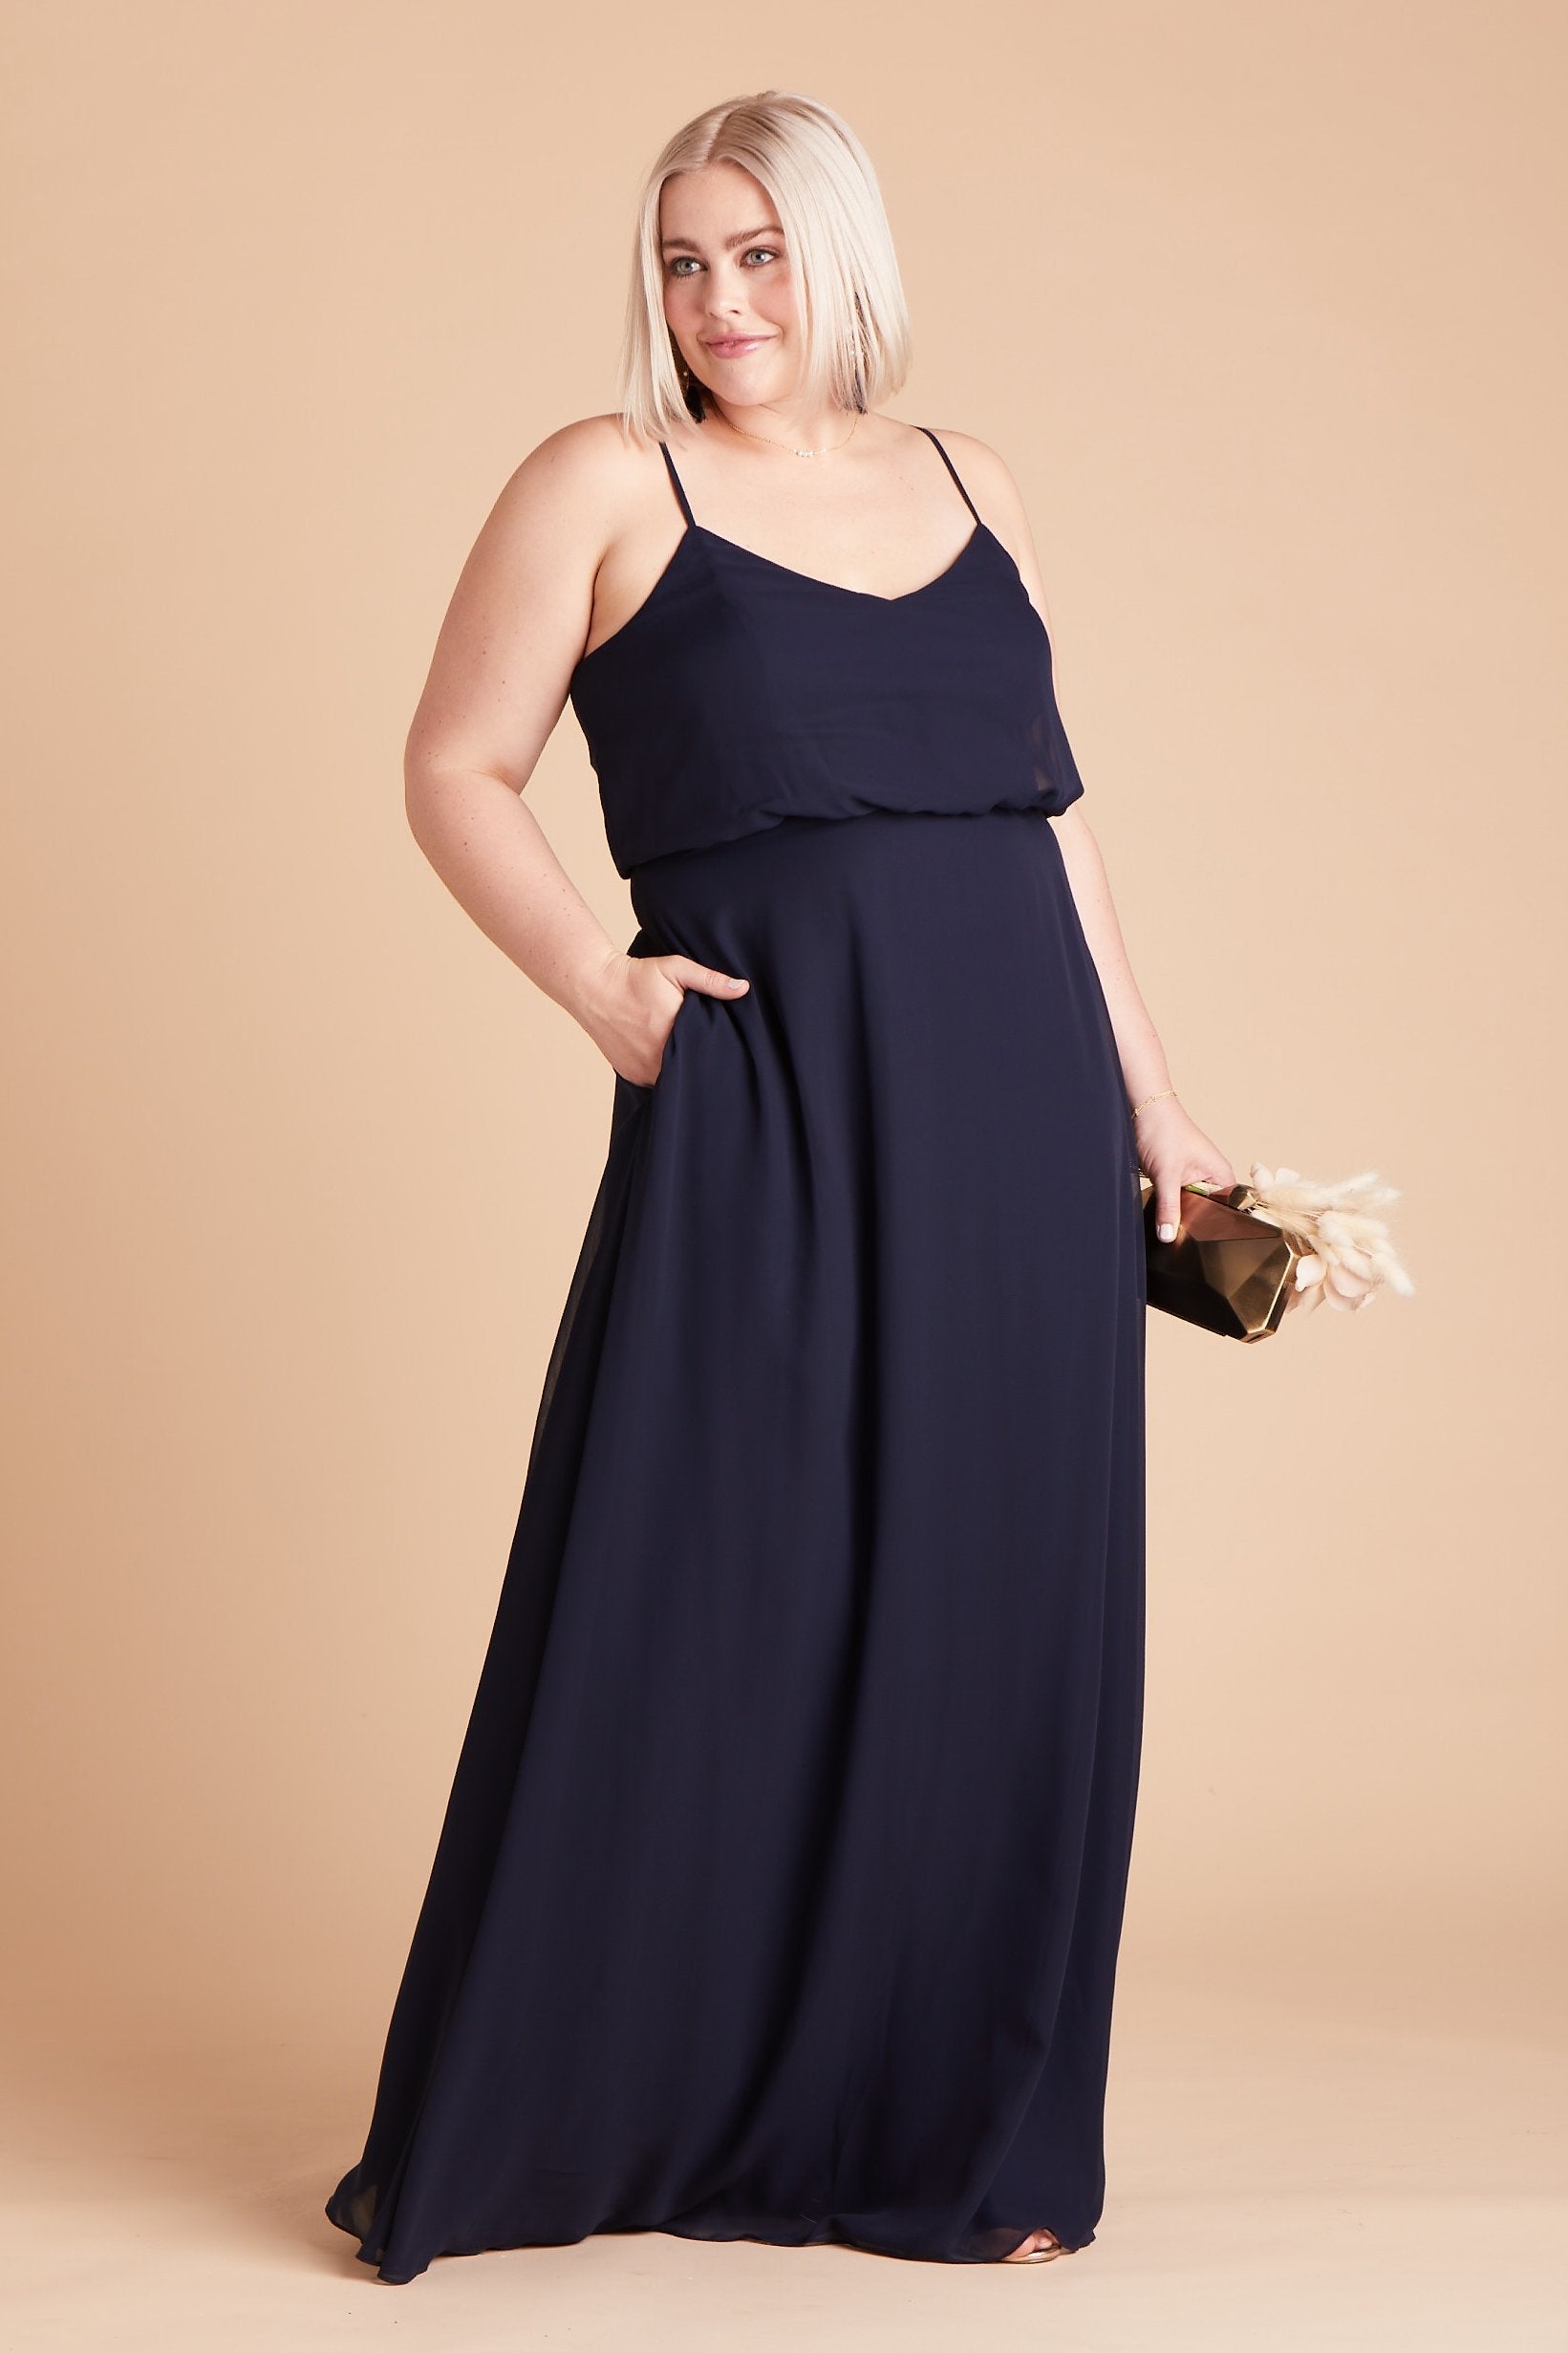 Gwennie plus size bridesmaid dress in navy blue chiffon by Birdy Grey, front view with hand in pocket